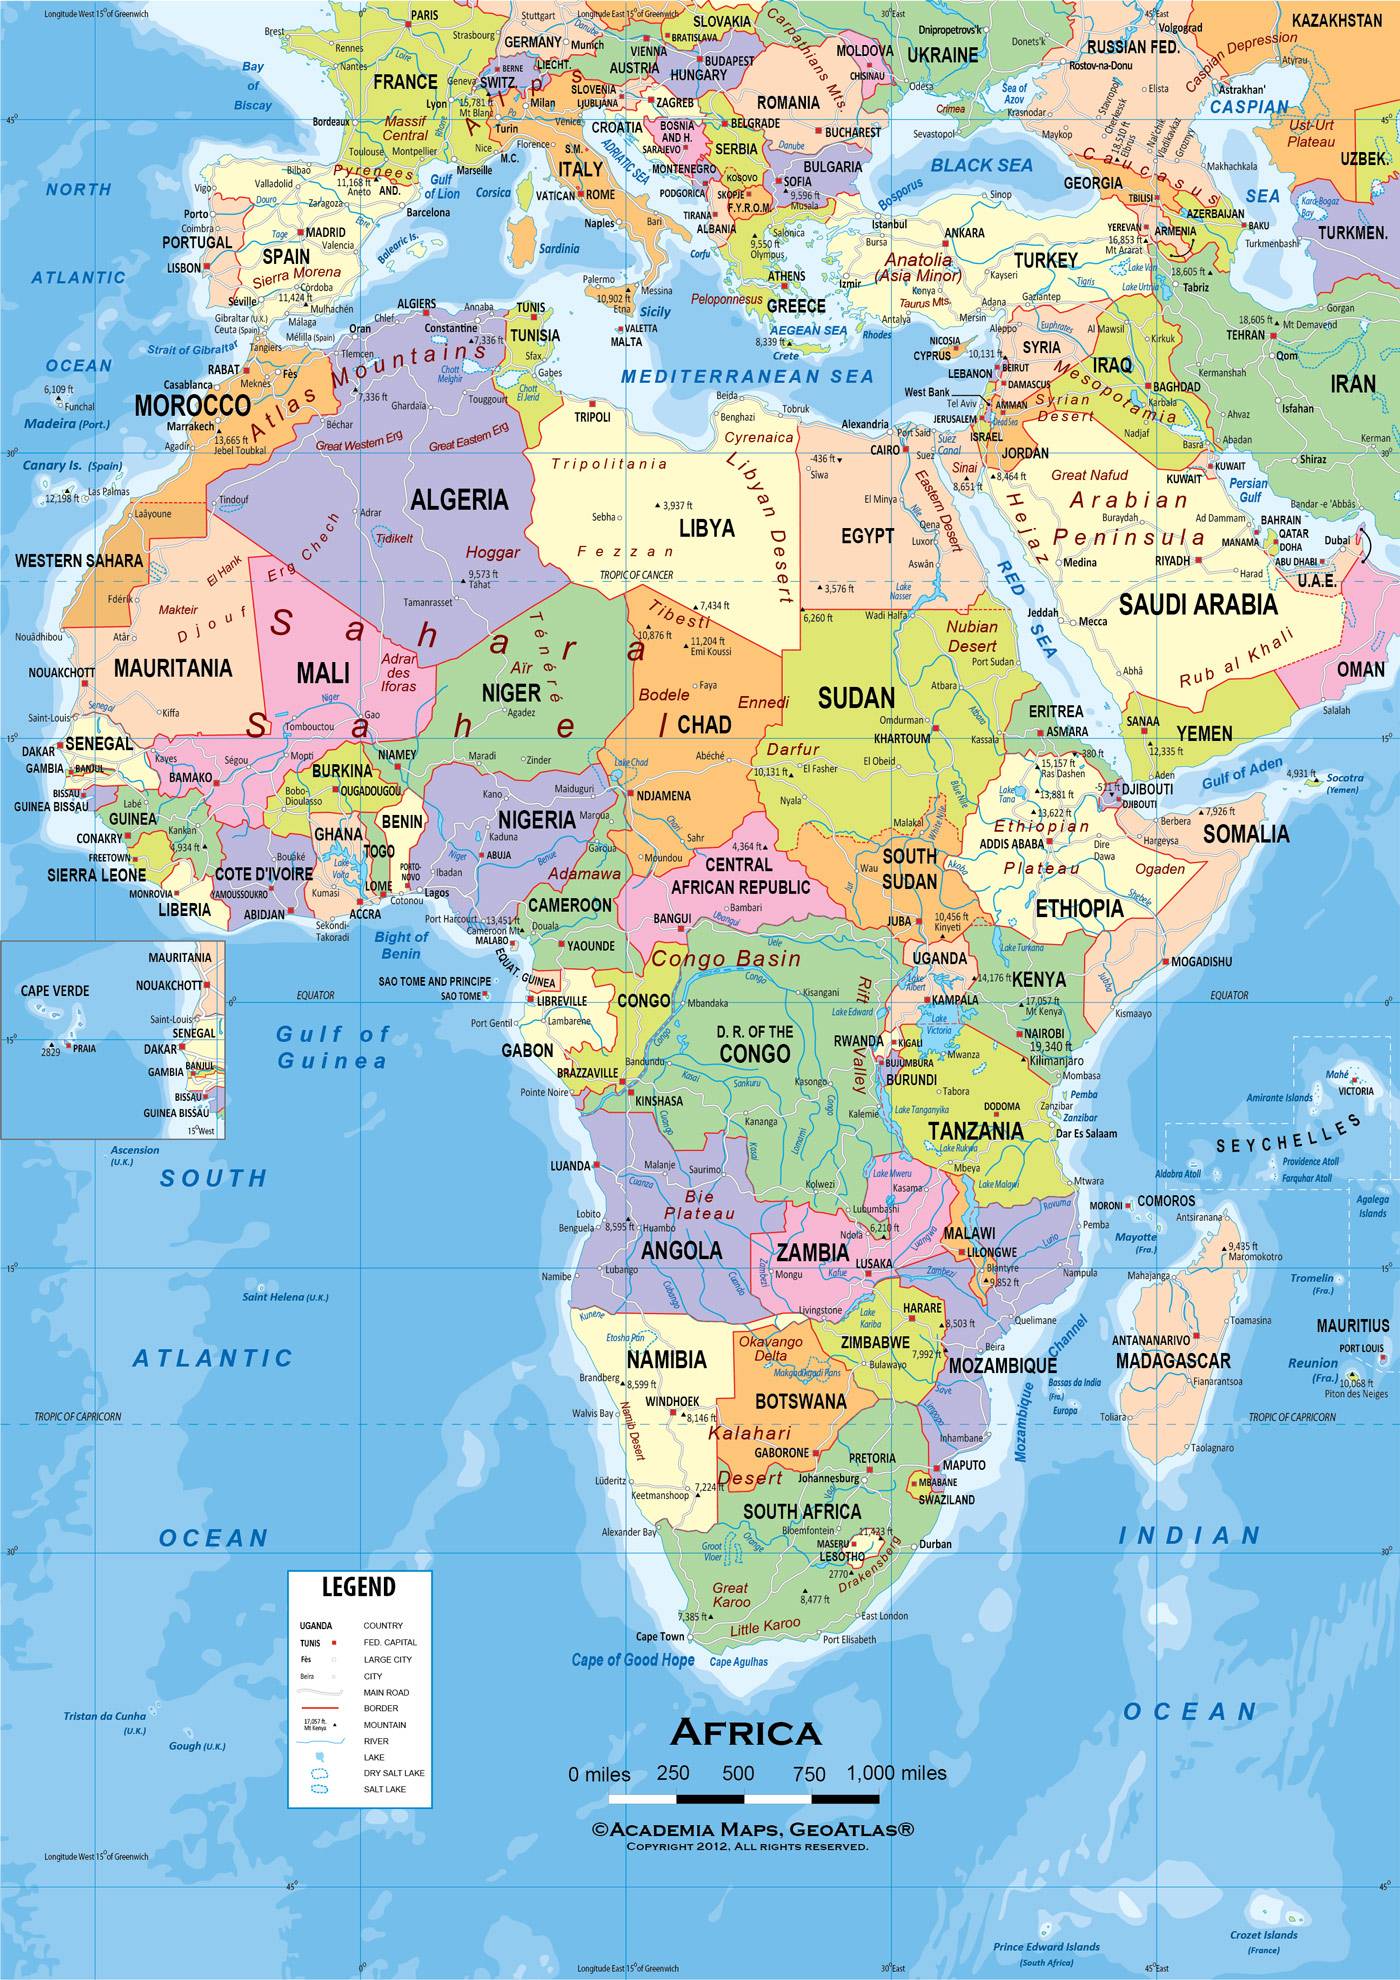 Africa Political Classroom Map Wall Mural from Academia